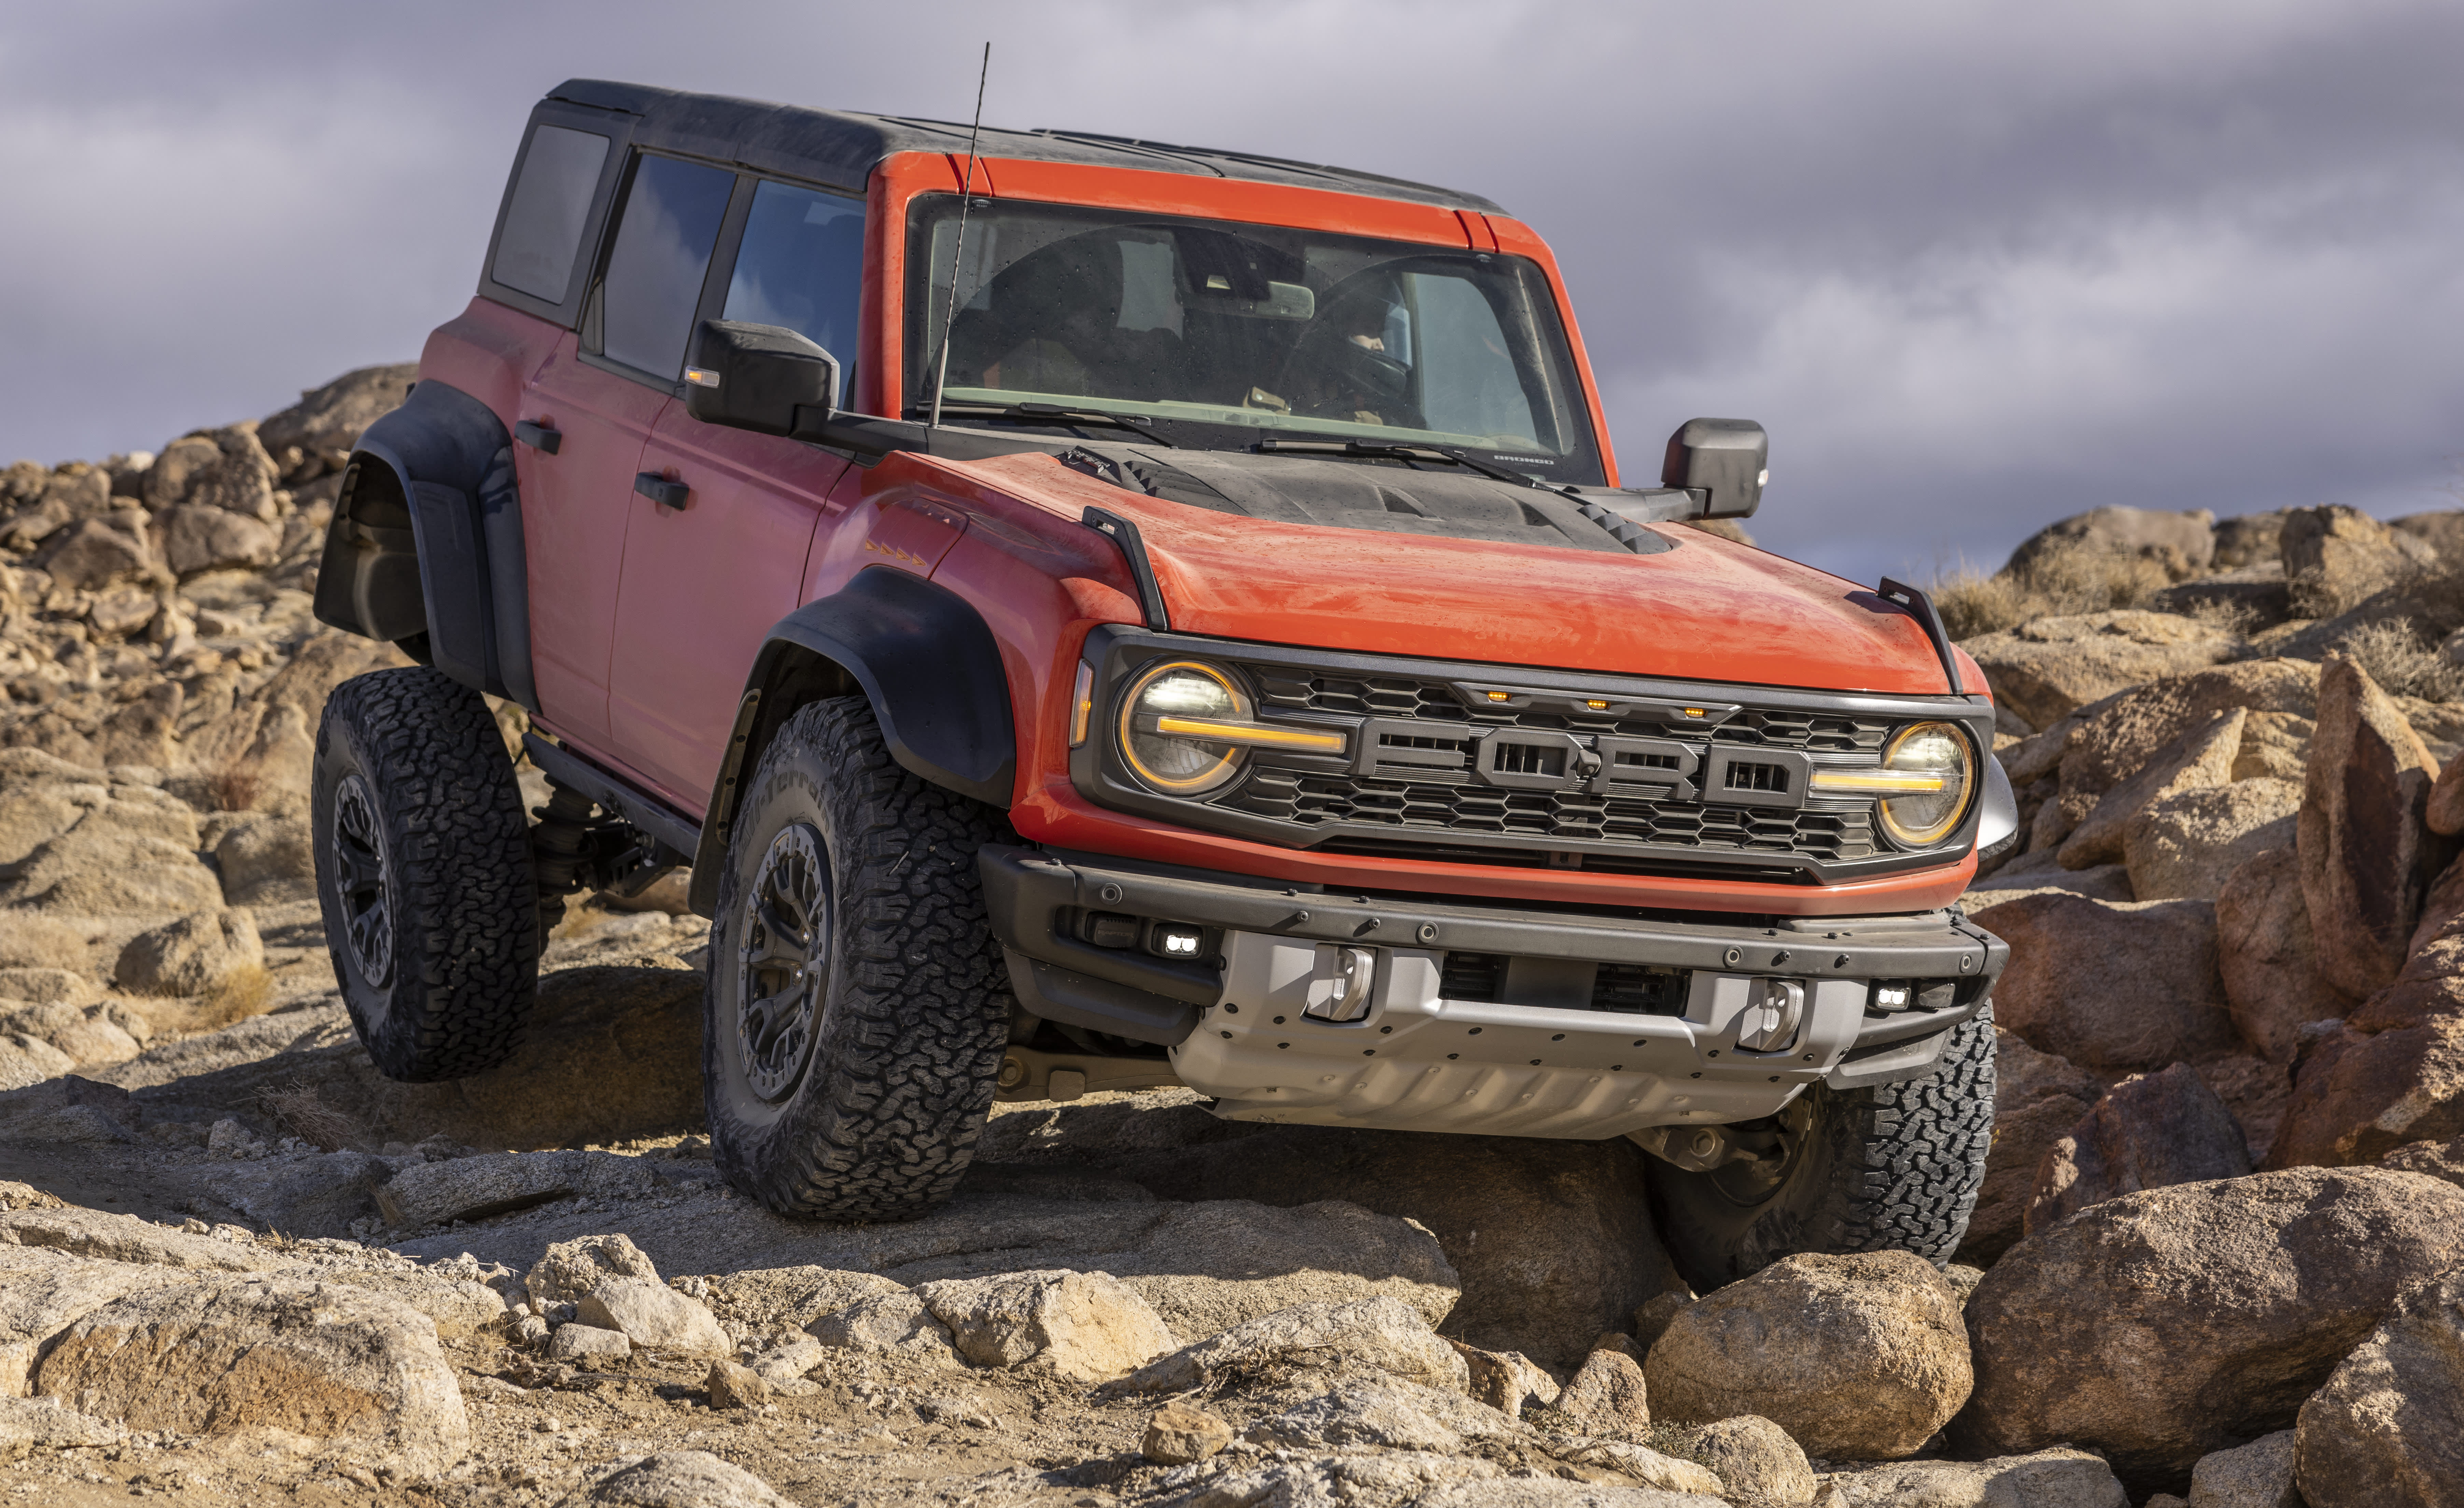 Ford Reveals New Bronco Raptor Performance SUV as a ‘Desert-Racing Beast,’ Says CEO – NBC Los Angeles